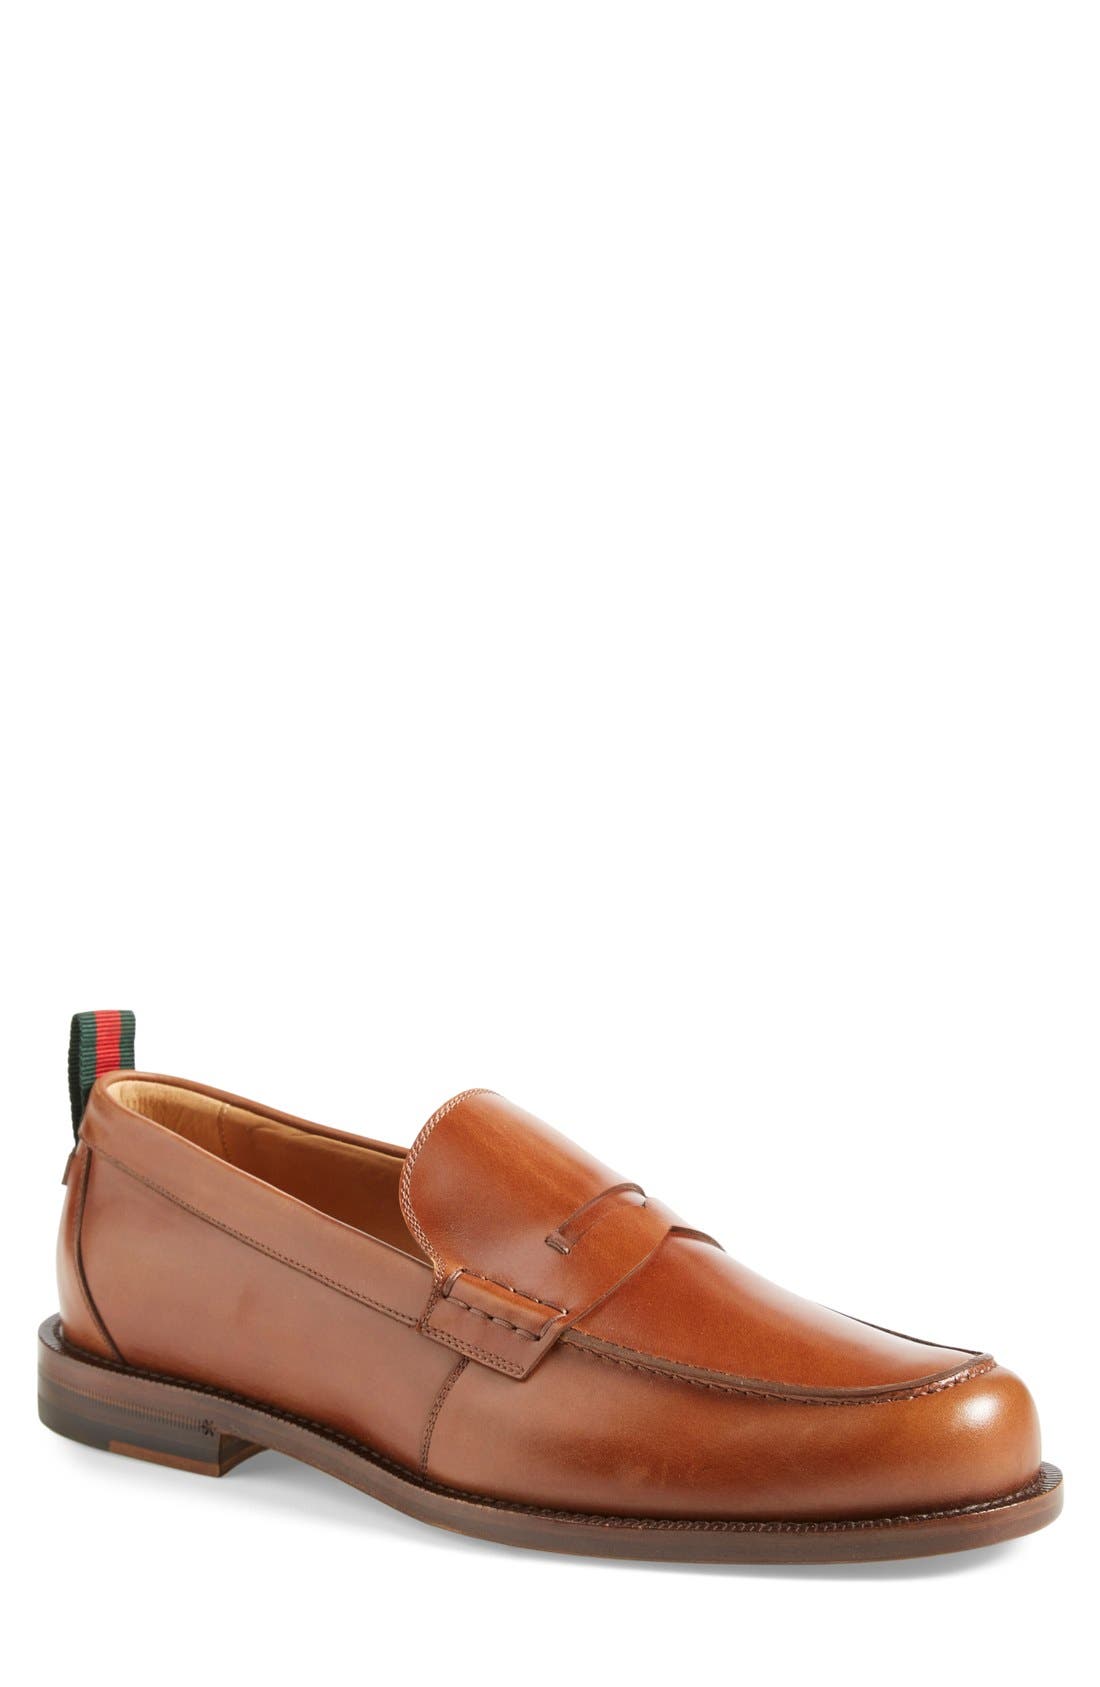 gucci penny loafers mens